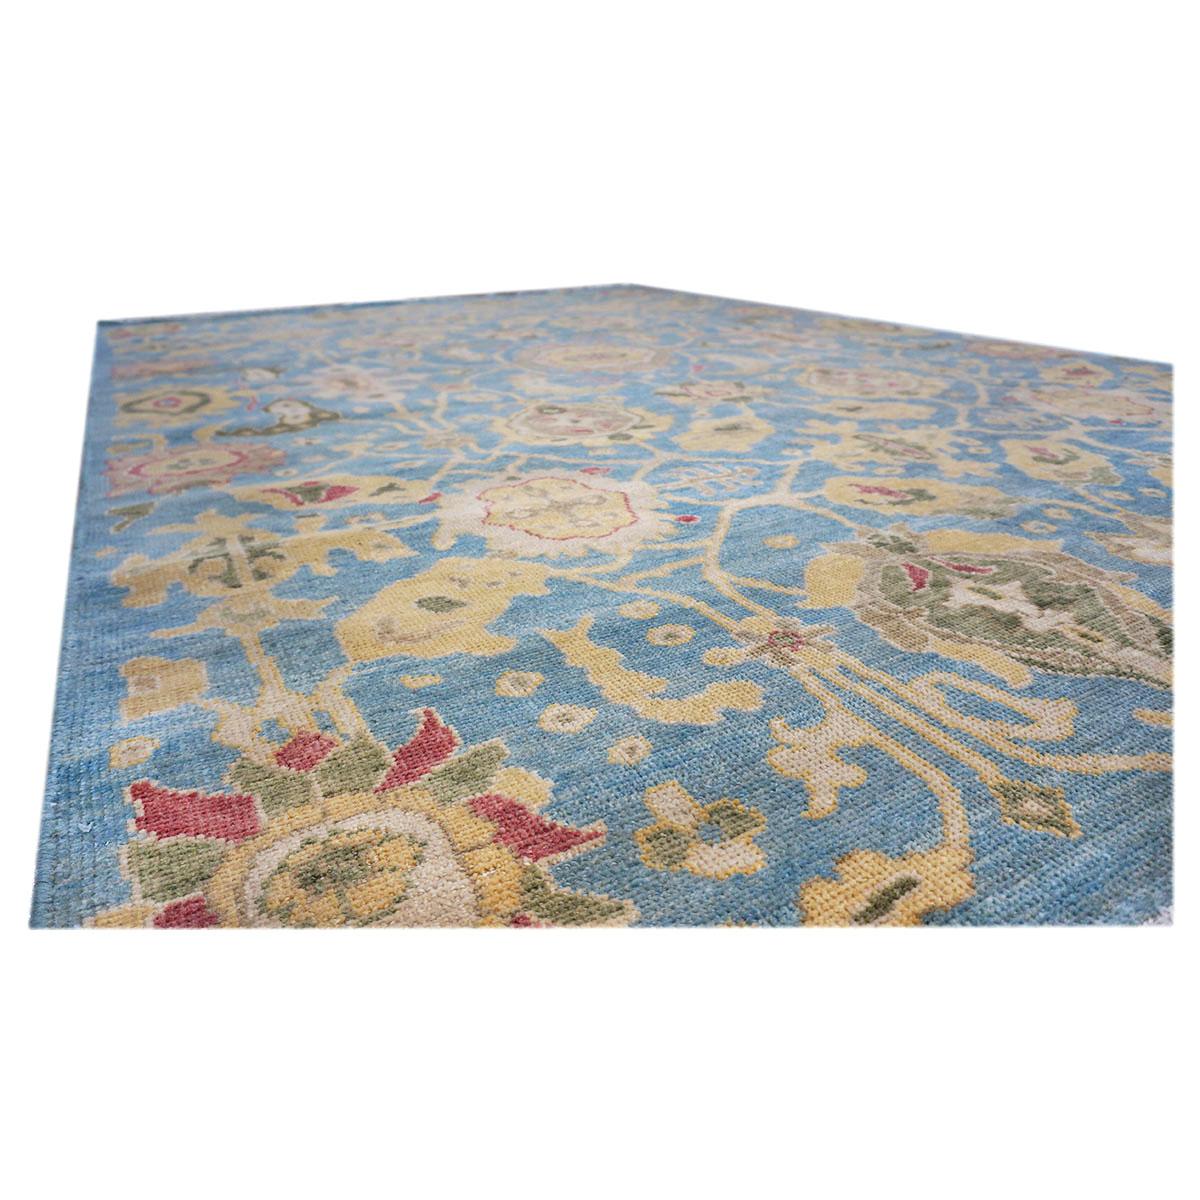 21st Century  Sultanabad 6x9 Blue & Yellow Handmade Area Rug In Excellent Condition For Sale In Houston, TX